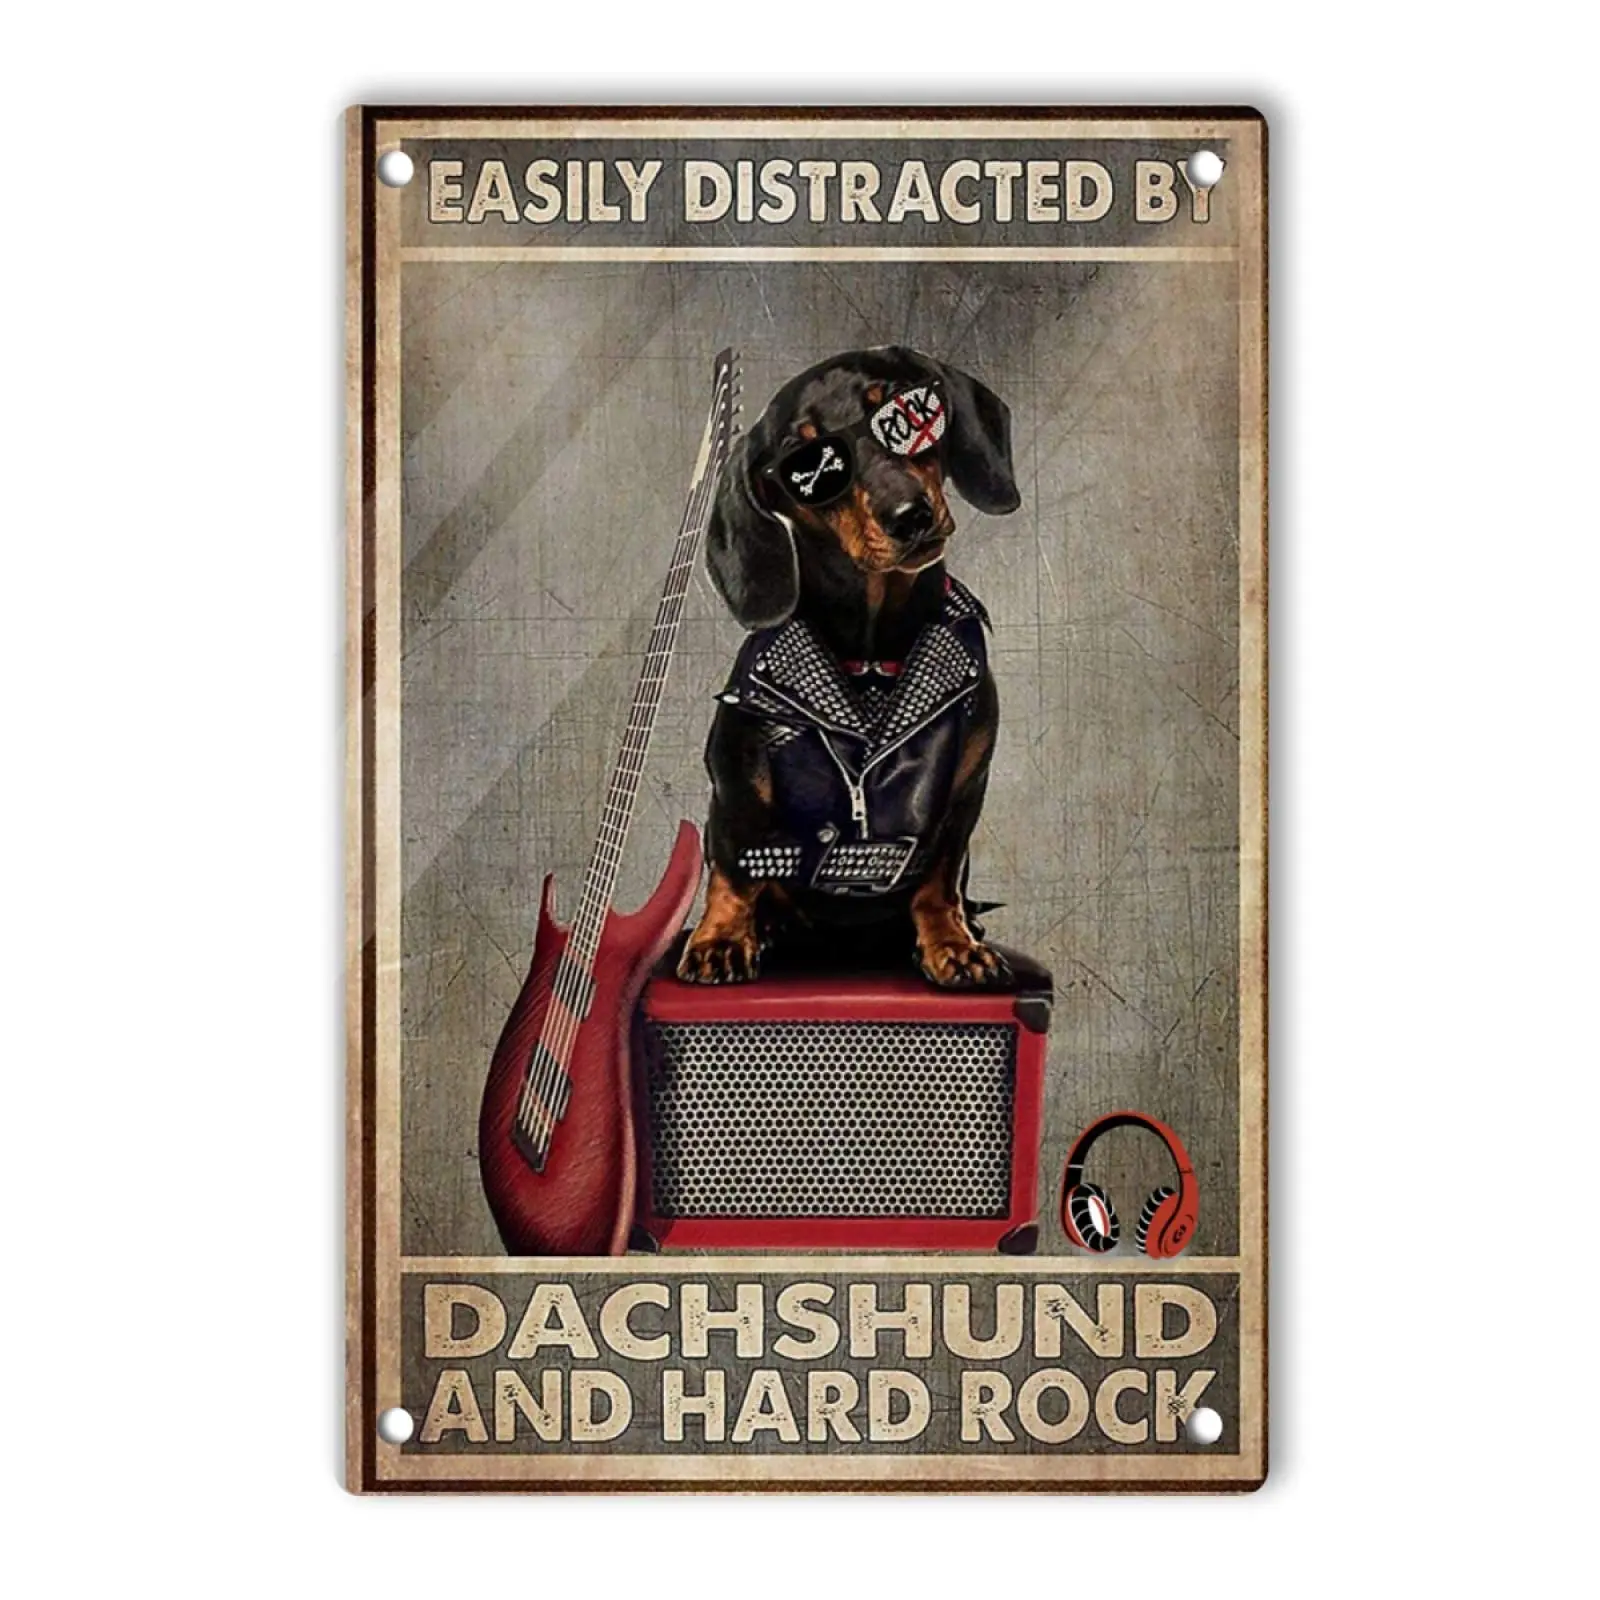 

Easily Distracted By Dachshund And Hard Rock Vintage metal Hanging Plaque Wall Decor Funny Home Bar Club Bedroom Wall Decoration